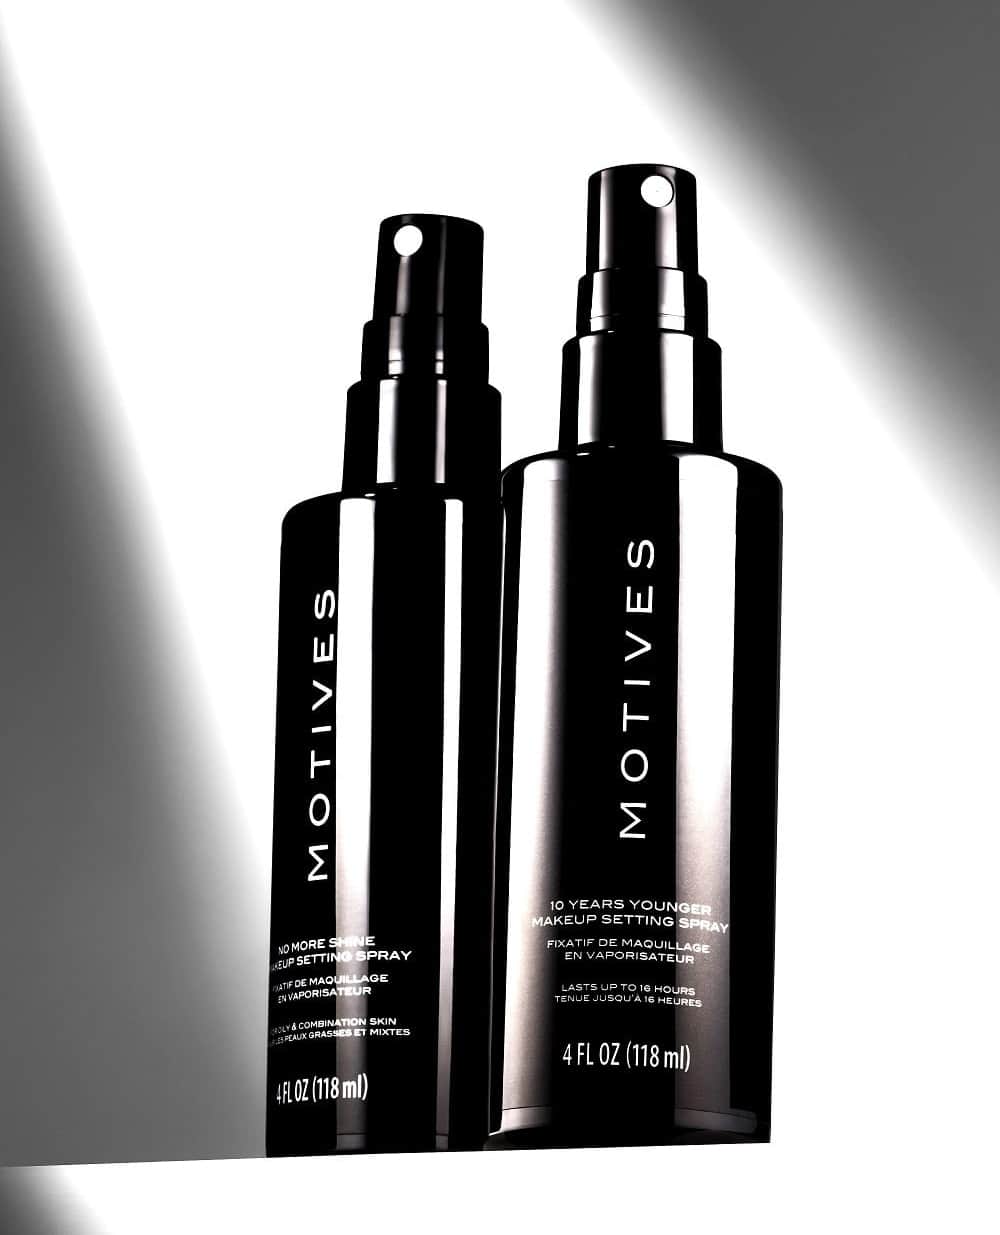 Motives Cosmeticsのインスタグラム：「2 amazing settings sprays with 2 different goals.⁠ ⁠ ⚡️No More Shine gives a mattifying affect to control shine all while keeping your look in check. ⁠ ⁠ ⚡️10 Years Younger gives a youthful look to help keep makeup from settling into fine lines and wrinkles all while locking in your look day and night. ⁠ ⁠ Link in Bio To 🎁⁠ ⁠ #settingspray #set #setandforget #mua #makeupthatlasts⁠」